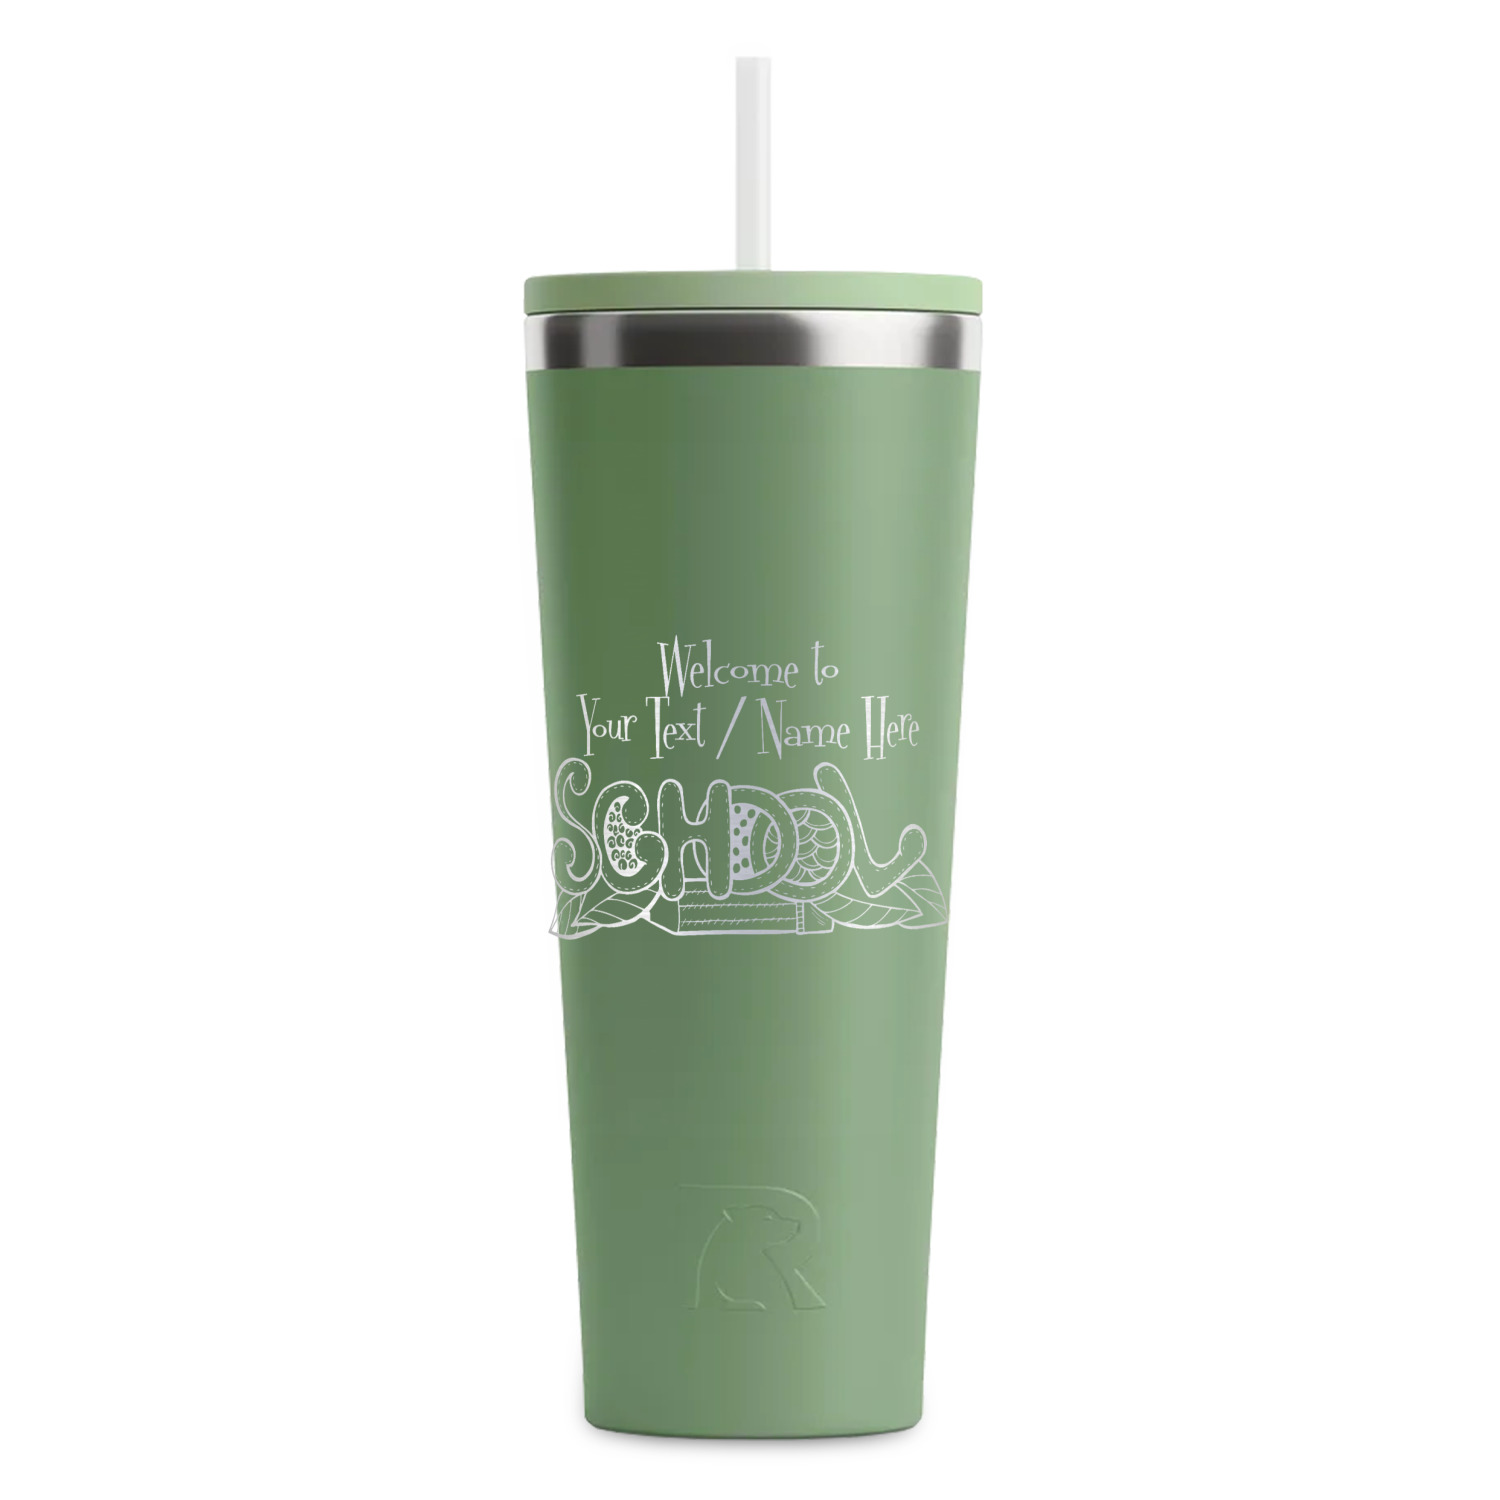 https://www.youcustomizeit.com/common/MAKE/2463811/Welcome-to-School-Light-Green-RTIC-Everyday-Tumbler-28-oz-Front.jpg?lm=1698263805